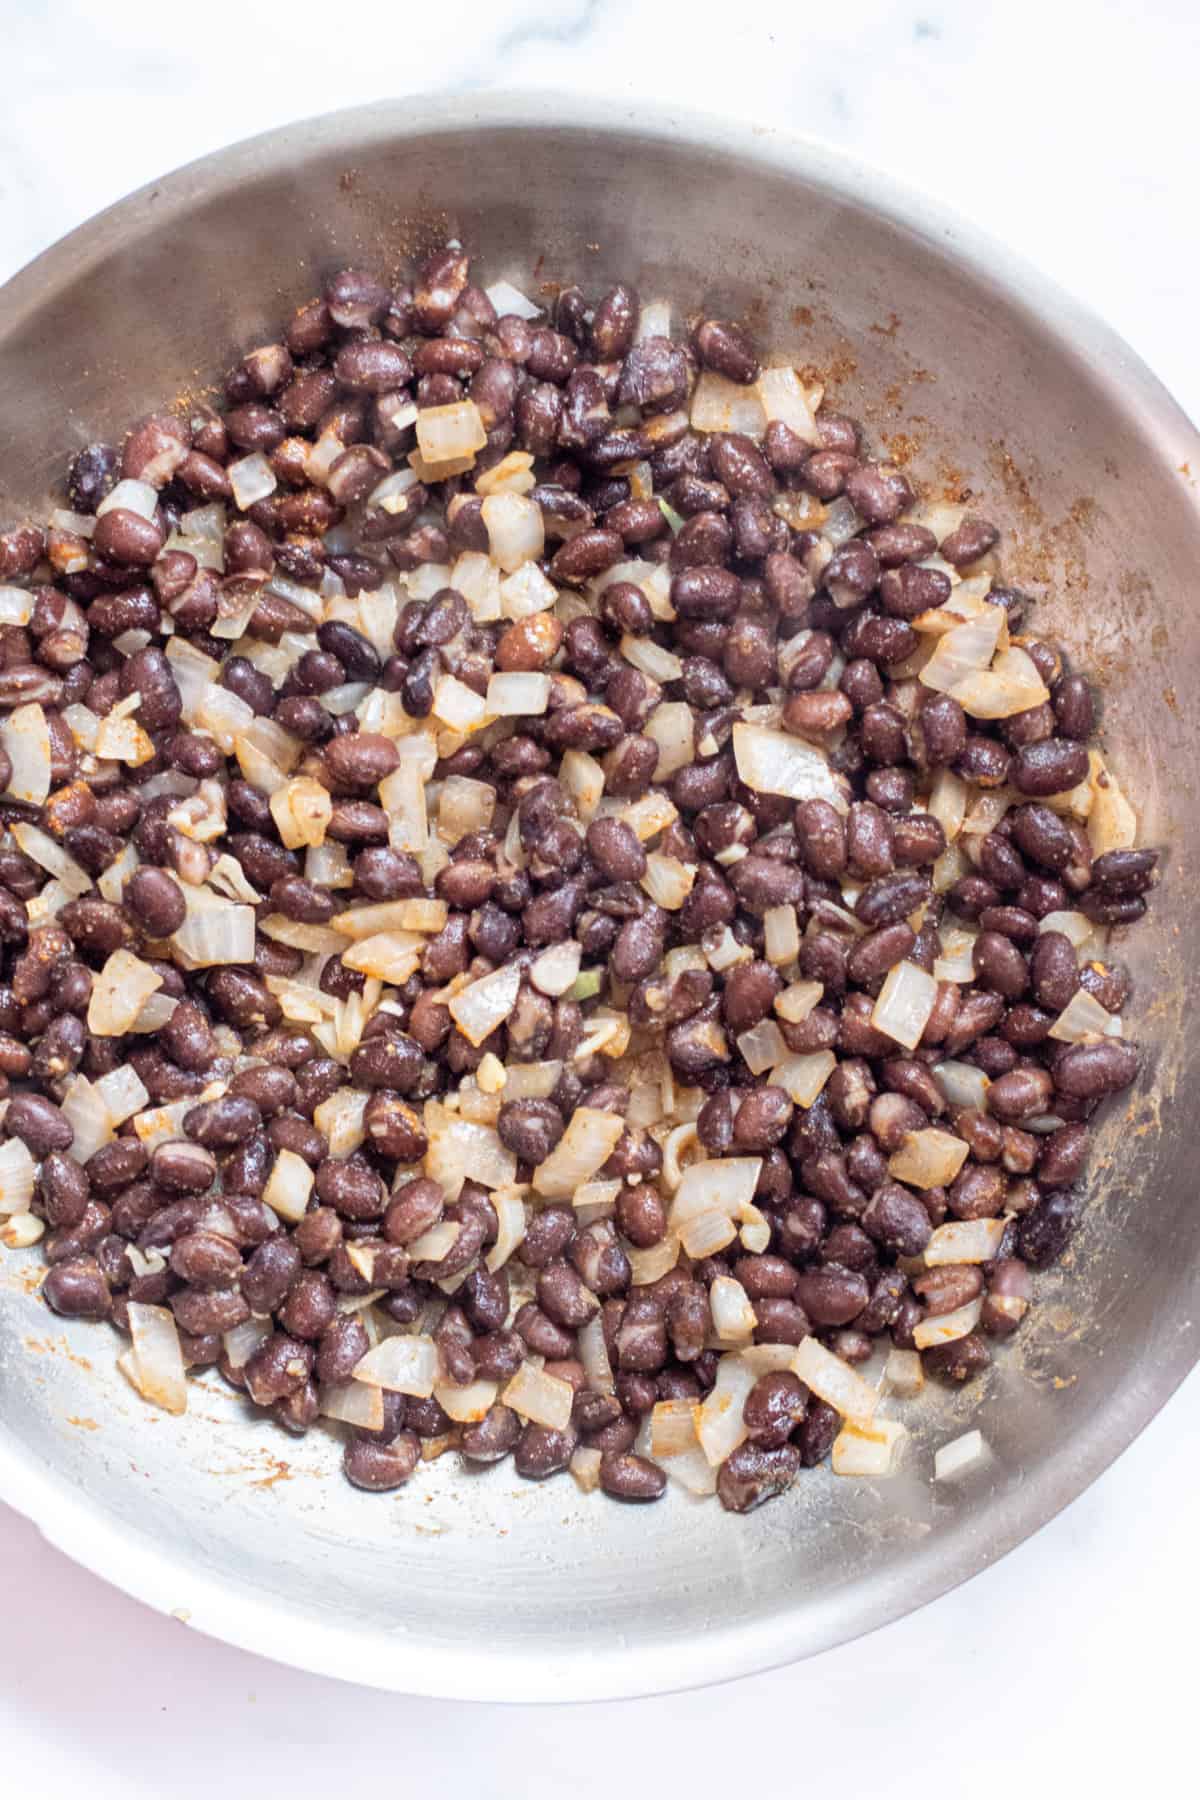 a pan of cooked black beans, onion, and garlic.